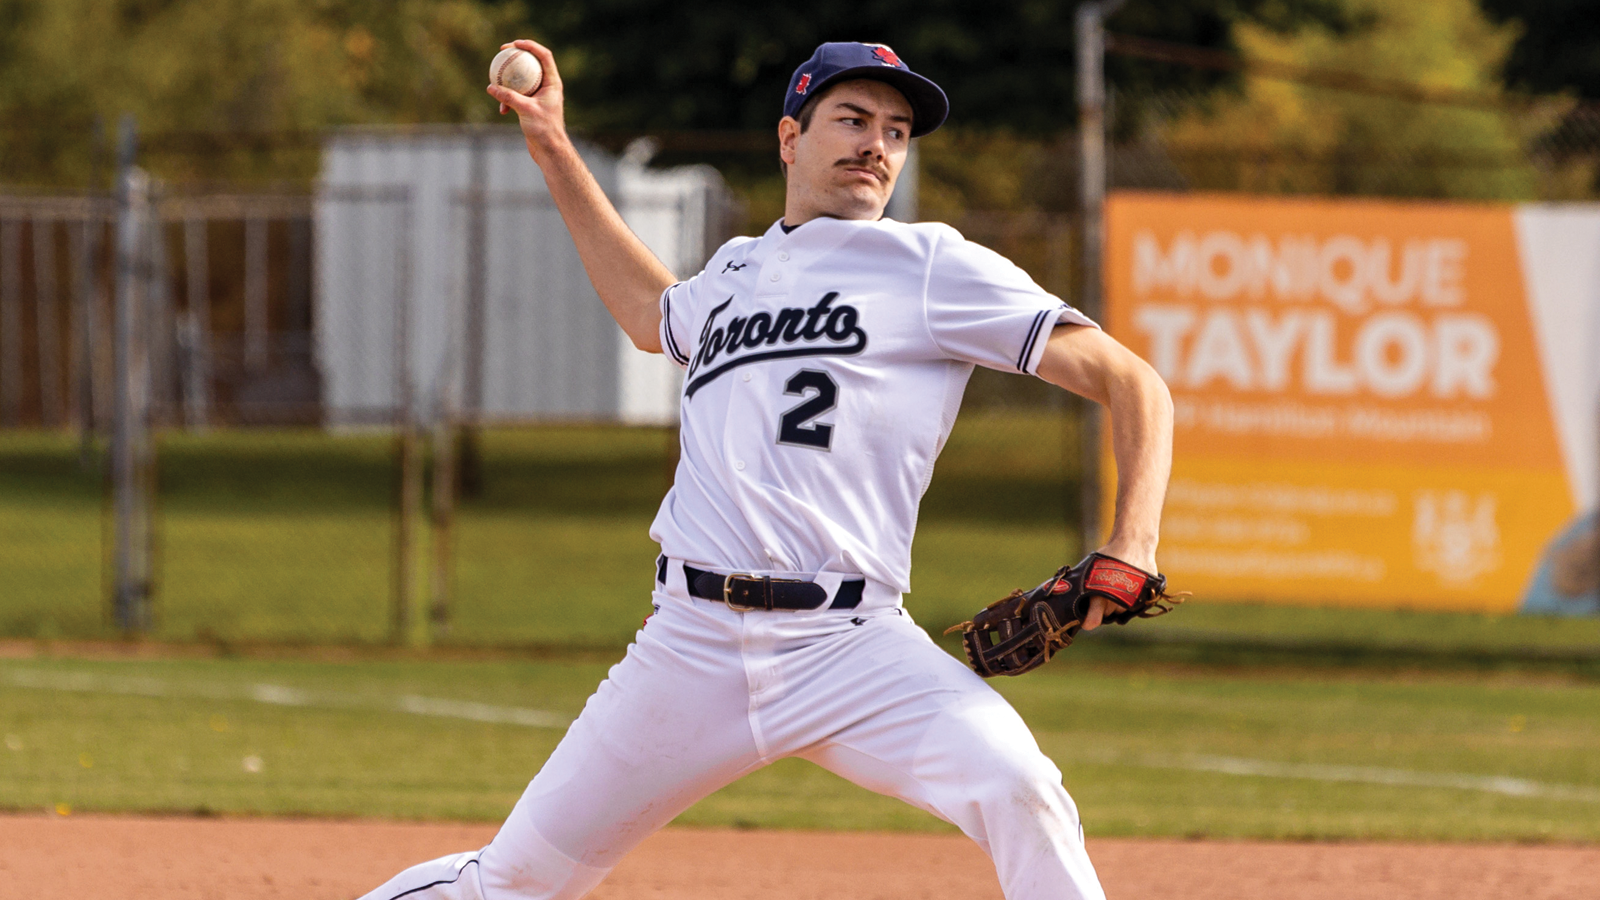 Toronto baseball pitcher Kevin Angers in mid-pitch on the mound during a game